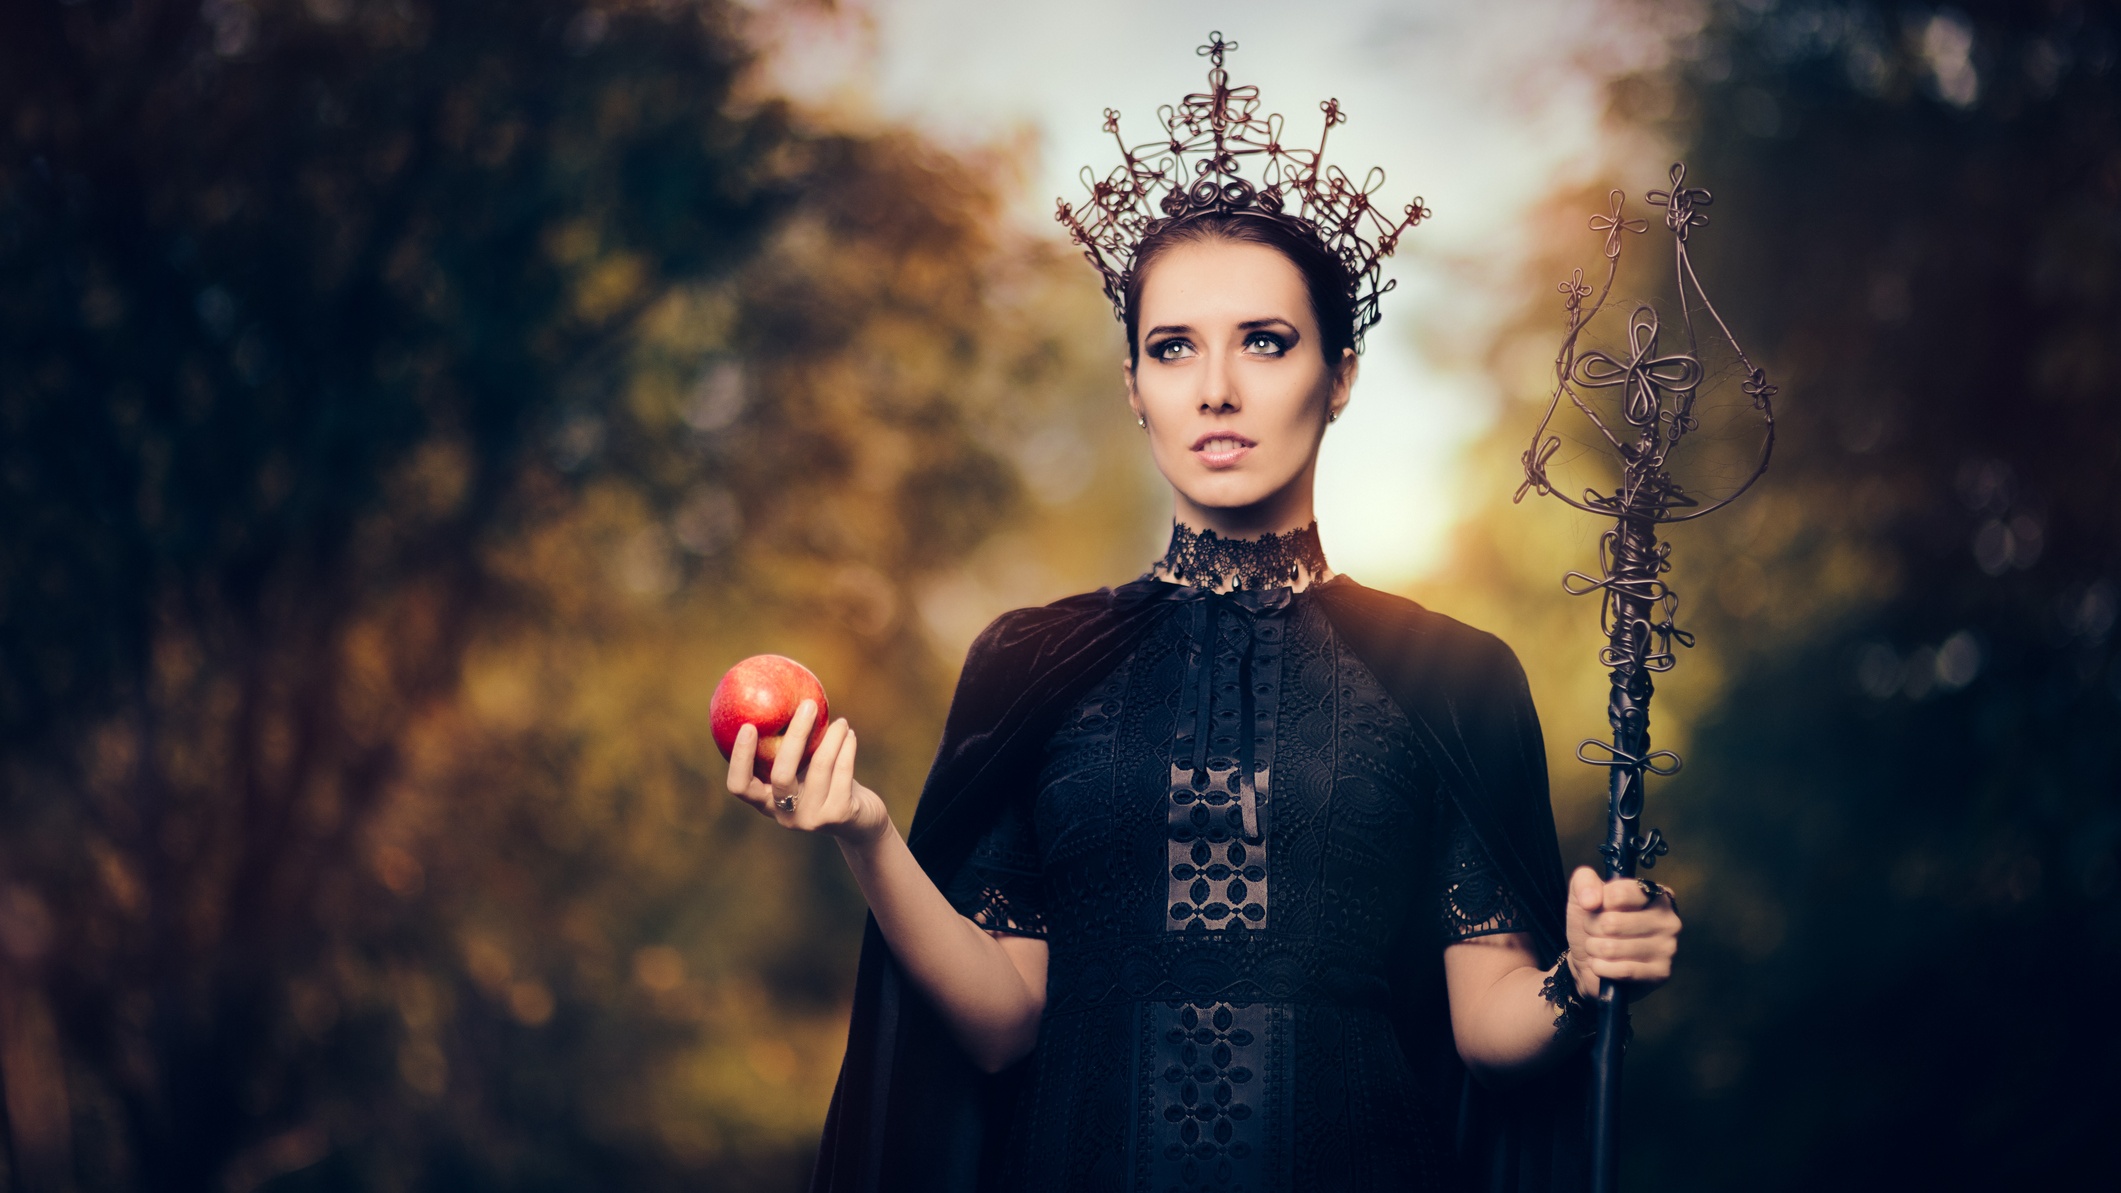 Generic photo of a witch holding an apple while outdoors (Thinkstock/PA)